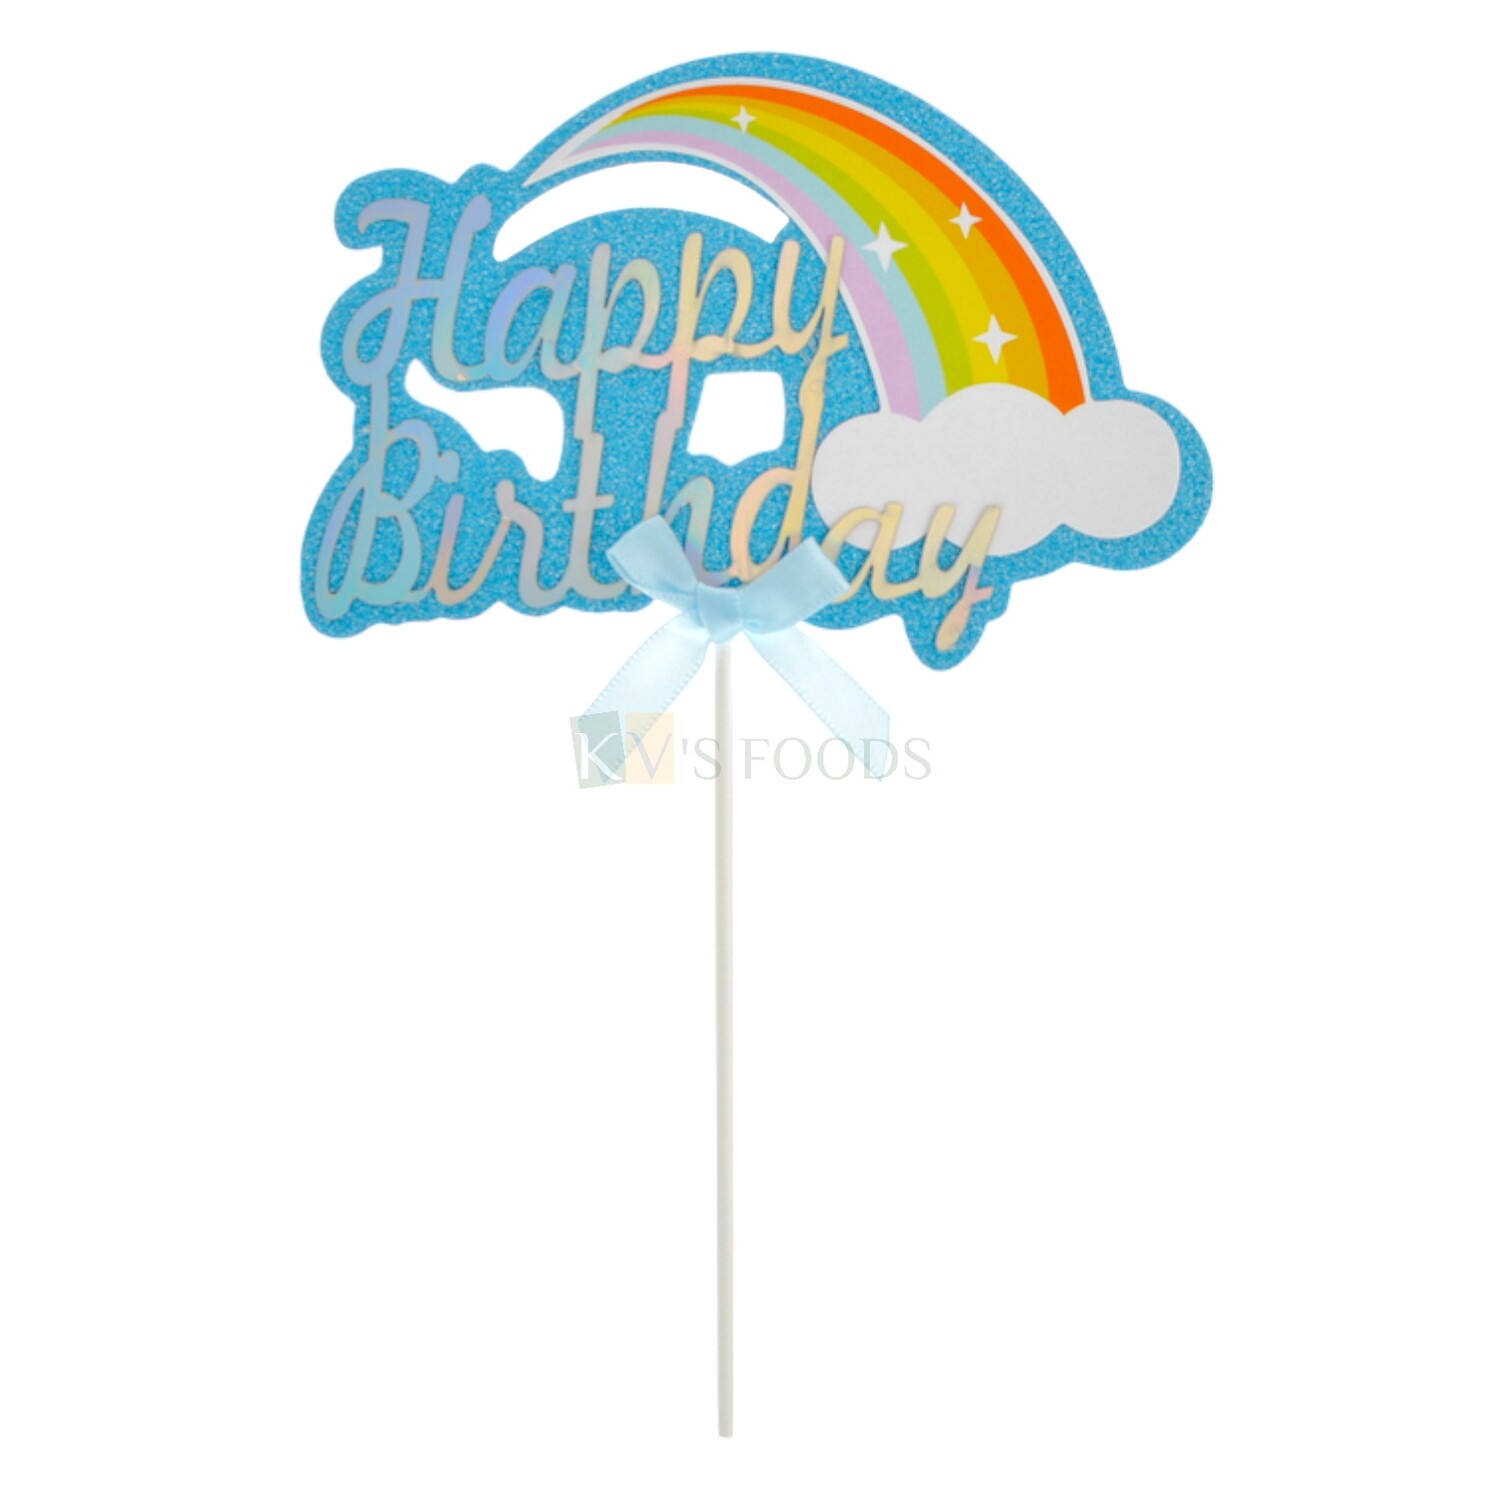 1PC Happy Birthday Message Glitter Sea Green Paper Cake Topper with Ribbon & Rainbow with Cloud, Cake Topper Insert, Cake Decoration Accessories, DIY Cake Decor.